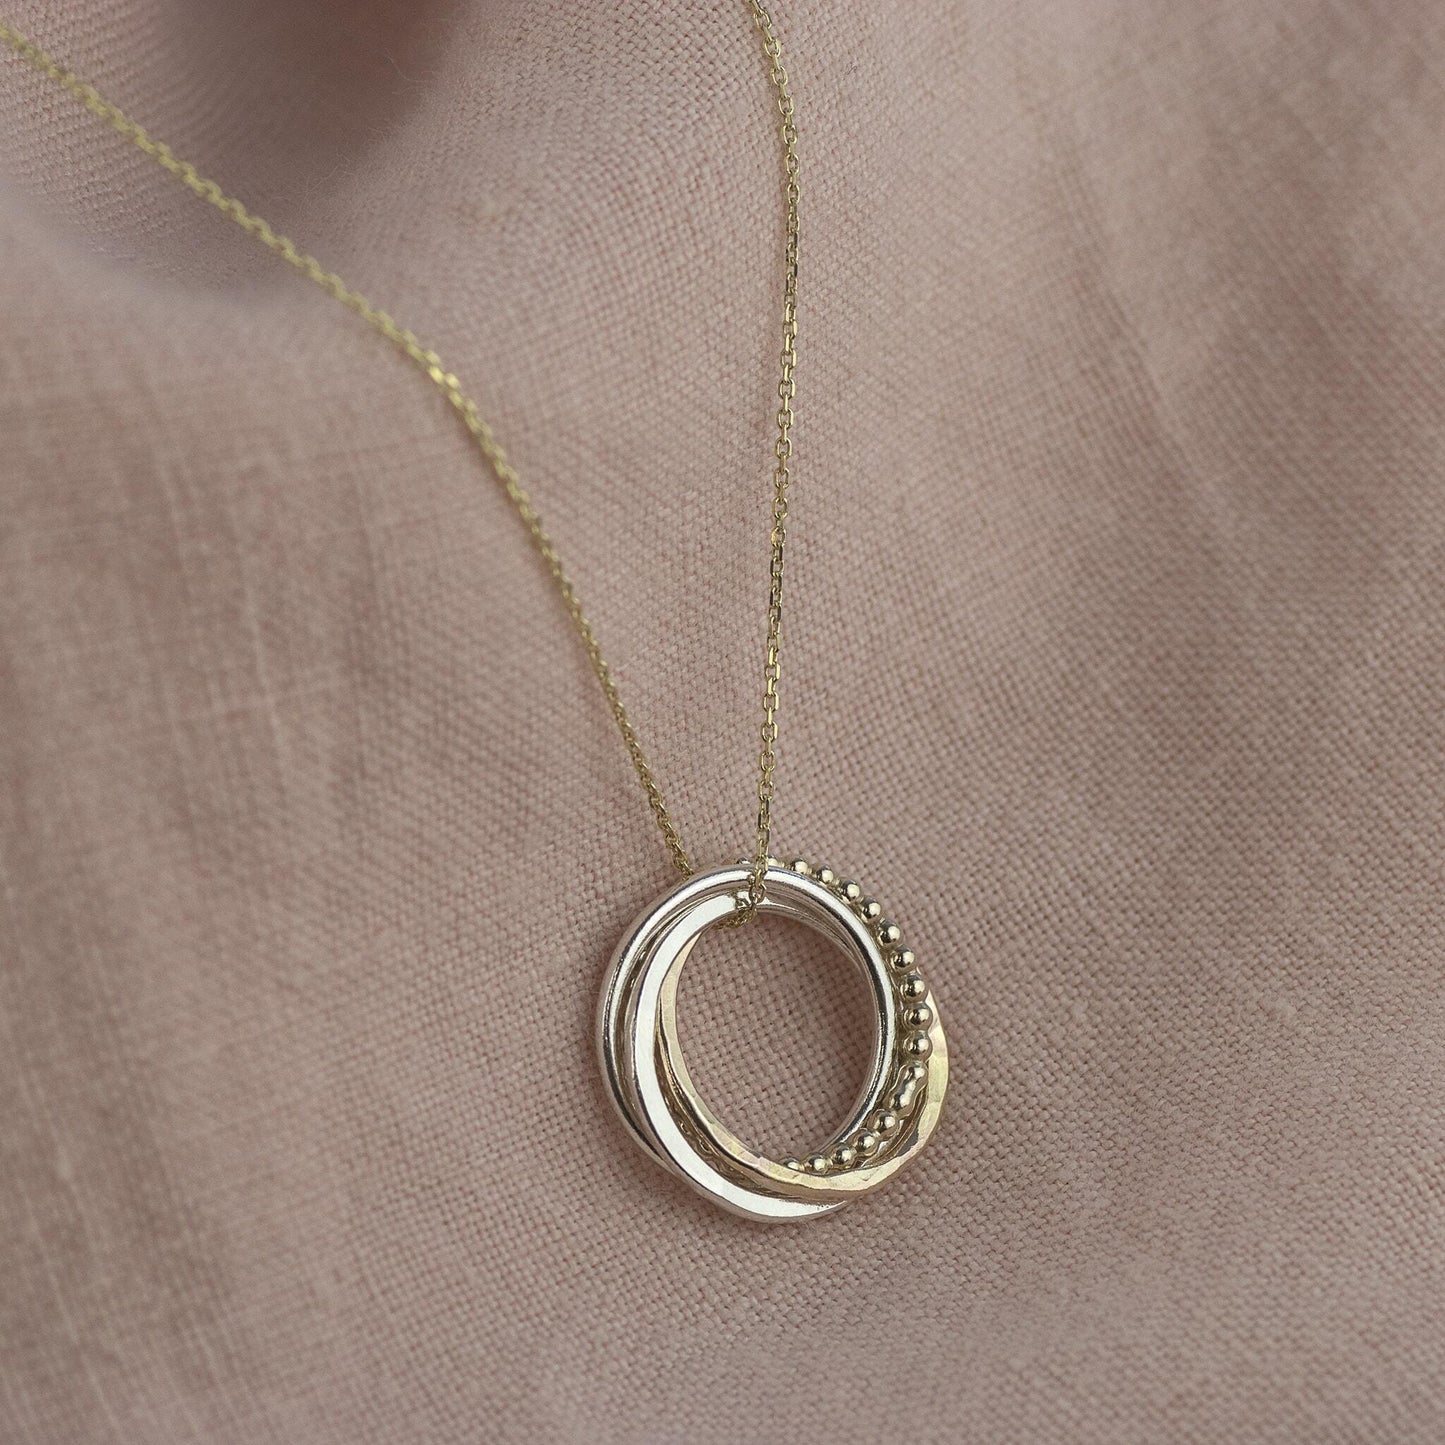 9kt Gold 40th Birthday Necklace - The Original 4 Links for 4 Decades Necklace - Petite Recycled Gold, Rose Gold & Silver